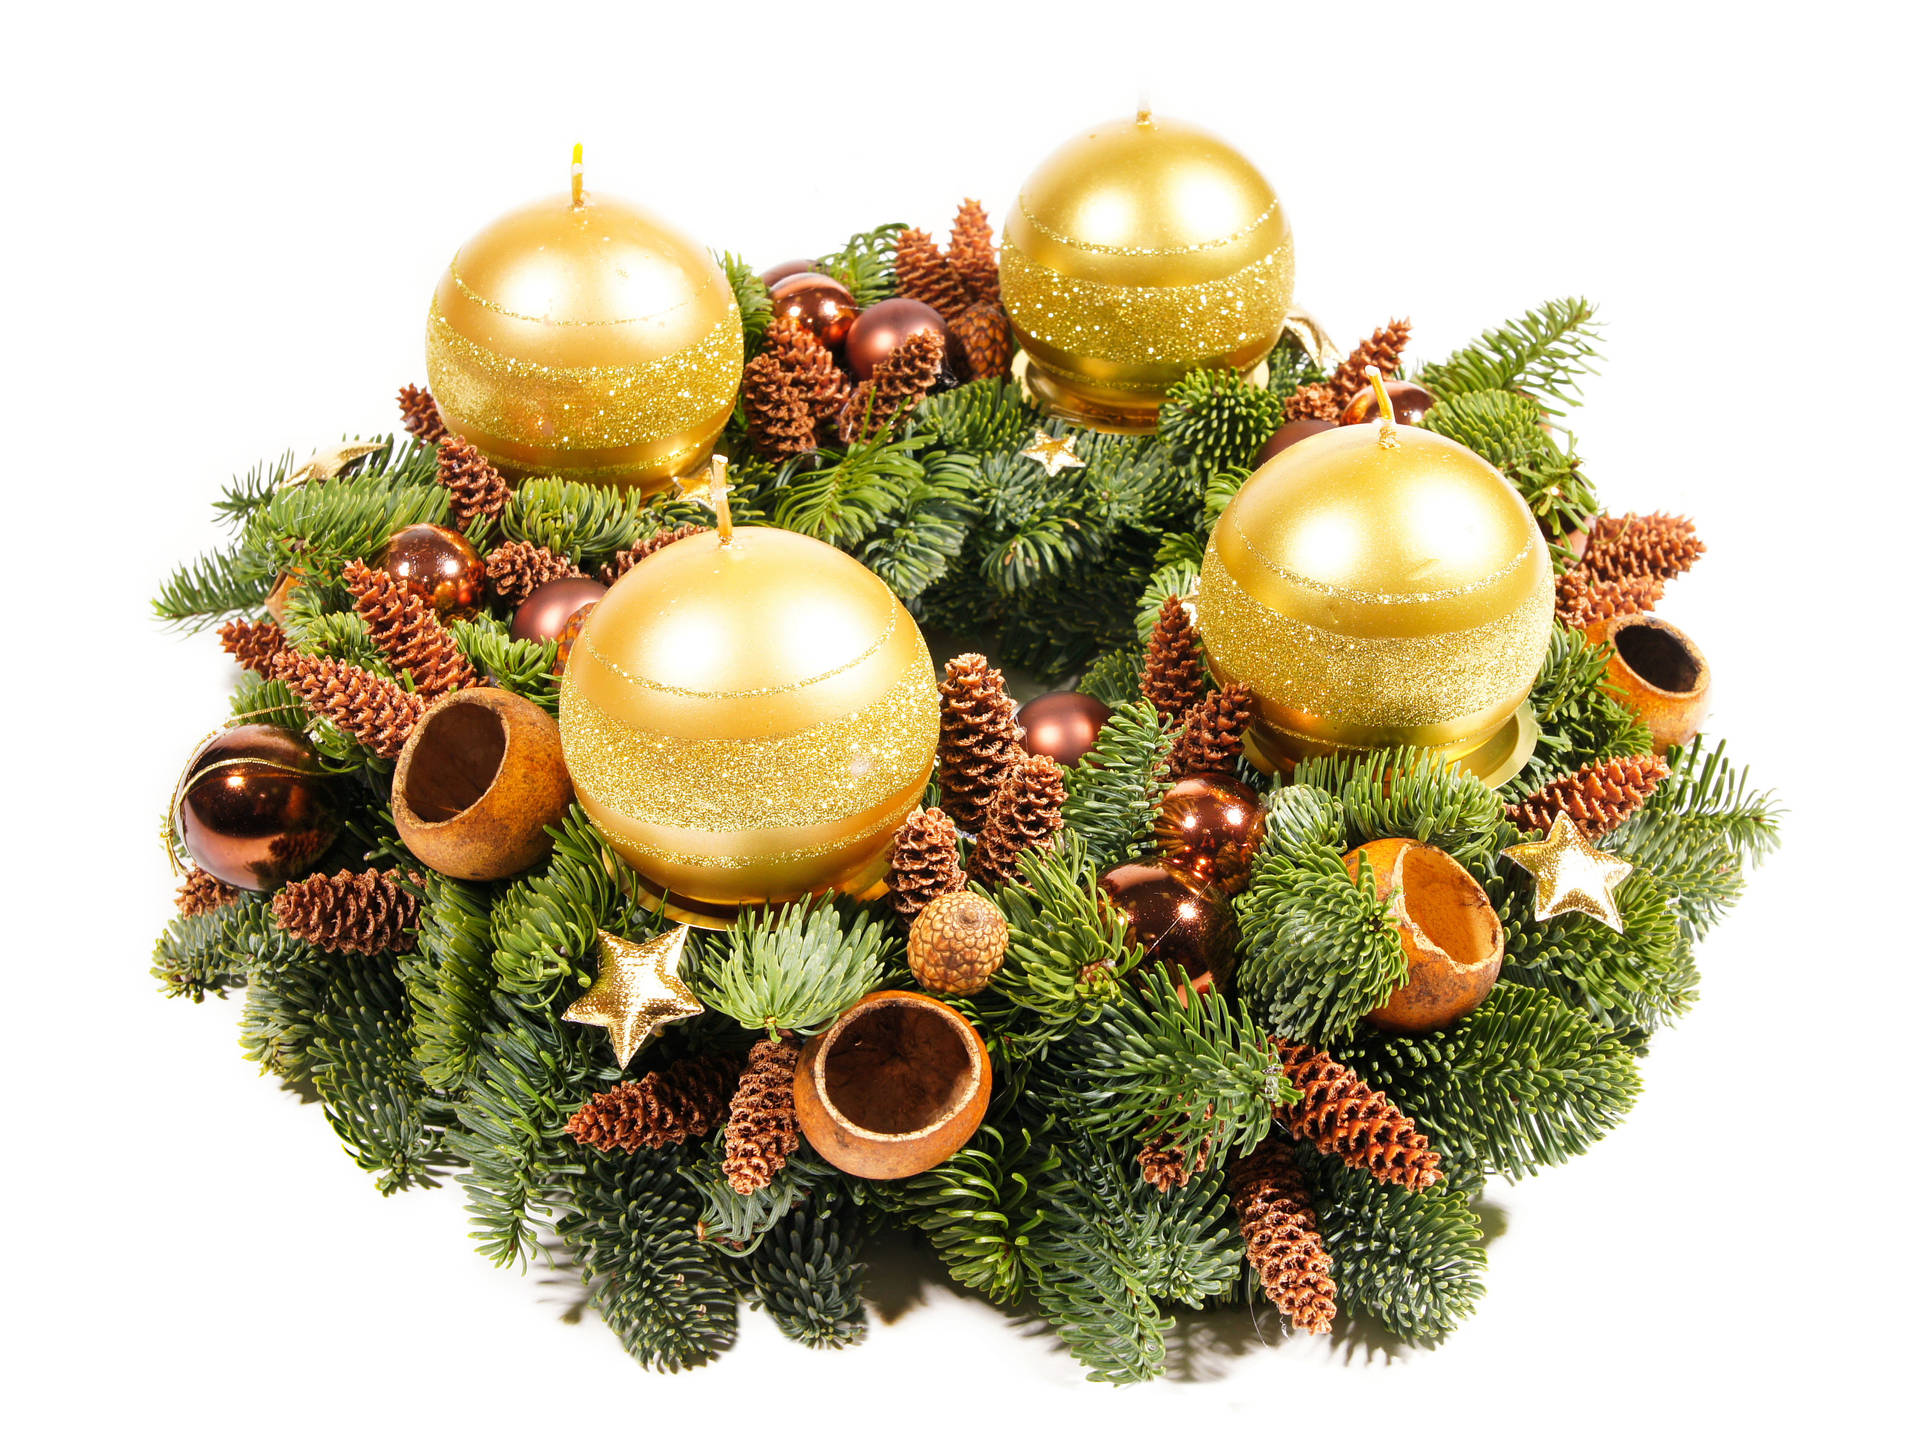 Christmas Wreath With Golden Balls Background